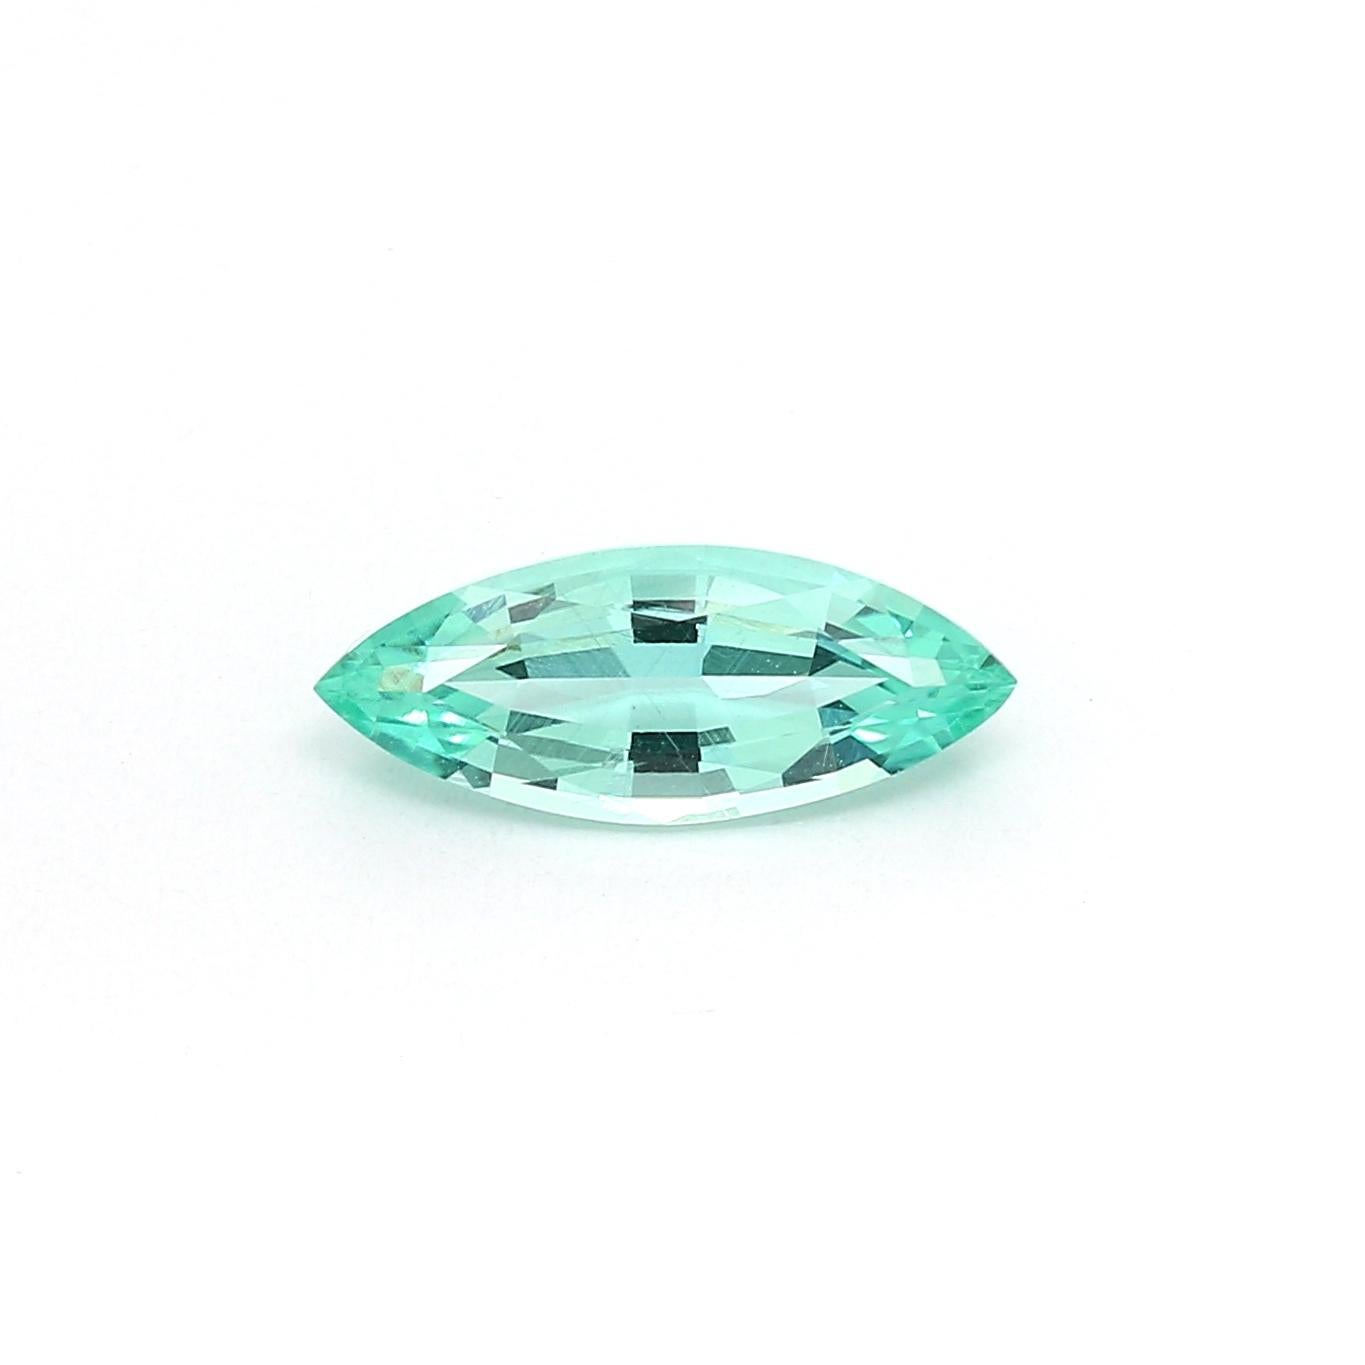 An exceptional eye-clean untreated Emerald from Ural Mountains of Russia. 
Perfect for a Ring or Pendant.

Shape - Marquise
Weight - 1.08 ct
Treatment - Untreated
Measurements (L*W*H): 12.23 X 4.92 X 3.45
Origin - Russia
Certificate - ICL


Tsarina